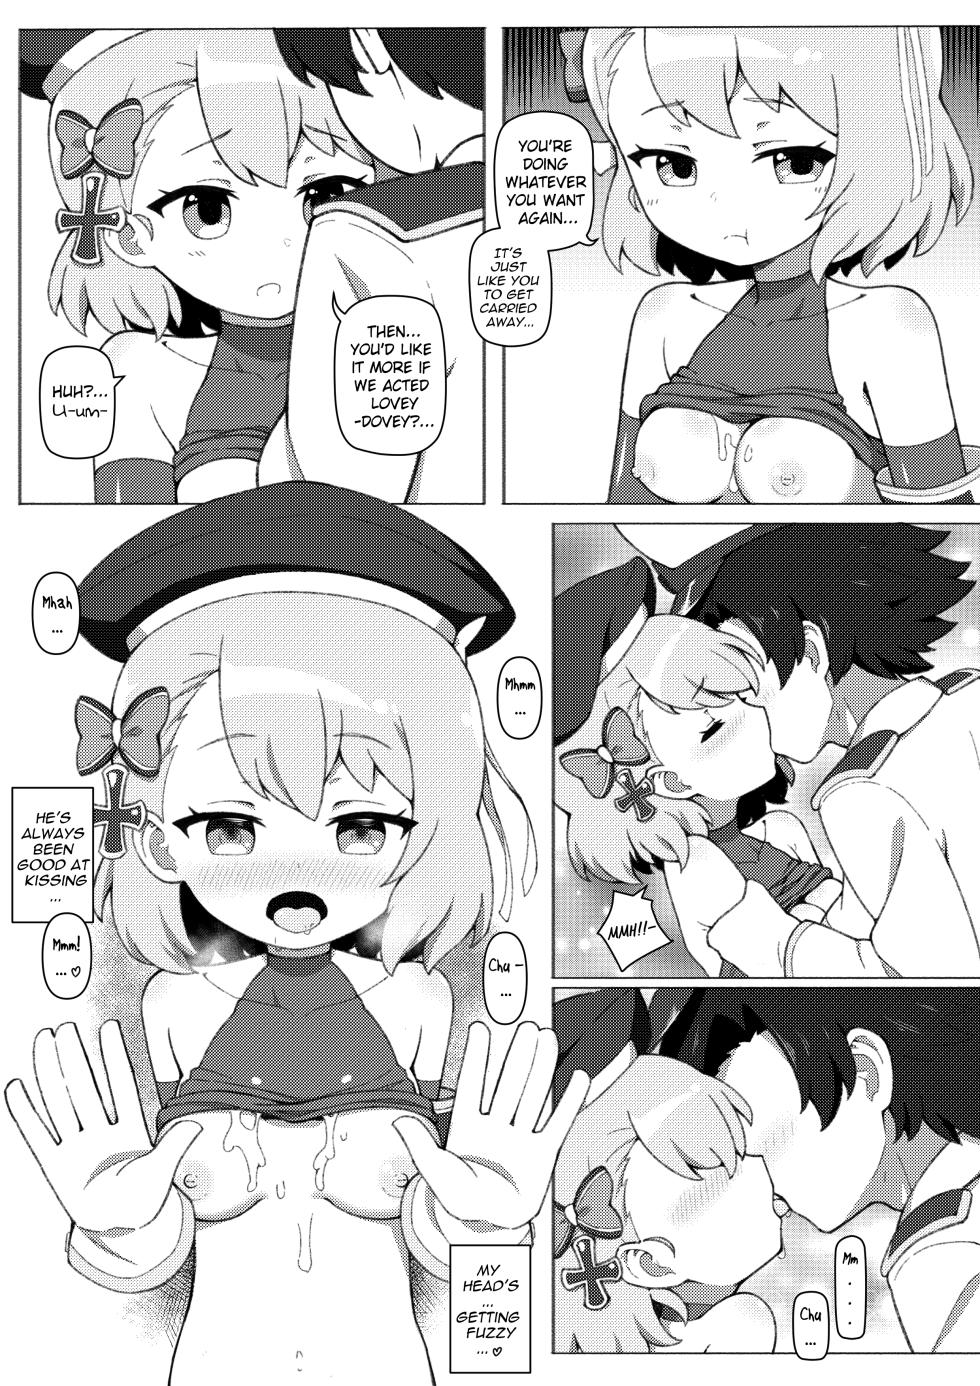 [losingmysauce] Secret Time With Z23 (Azur Lane) [English] [Censored] - Page 6